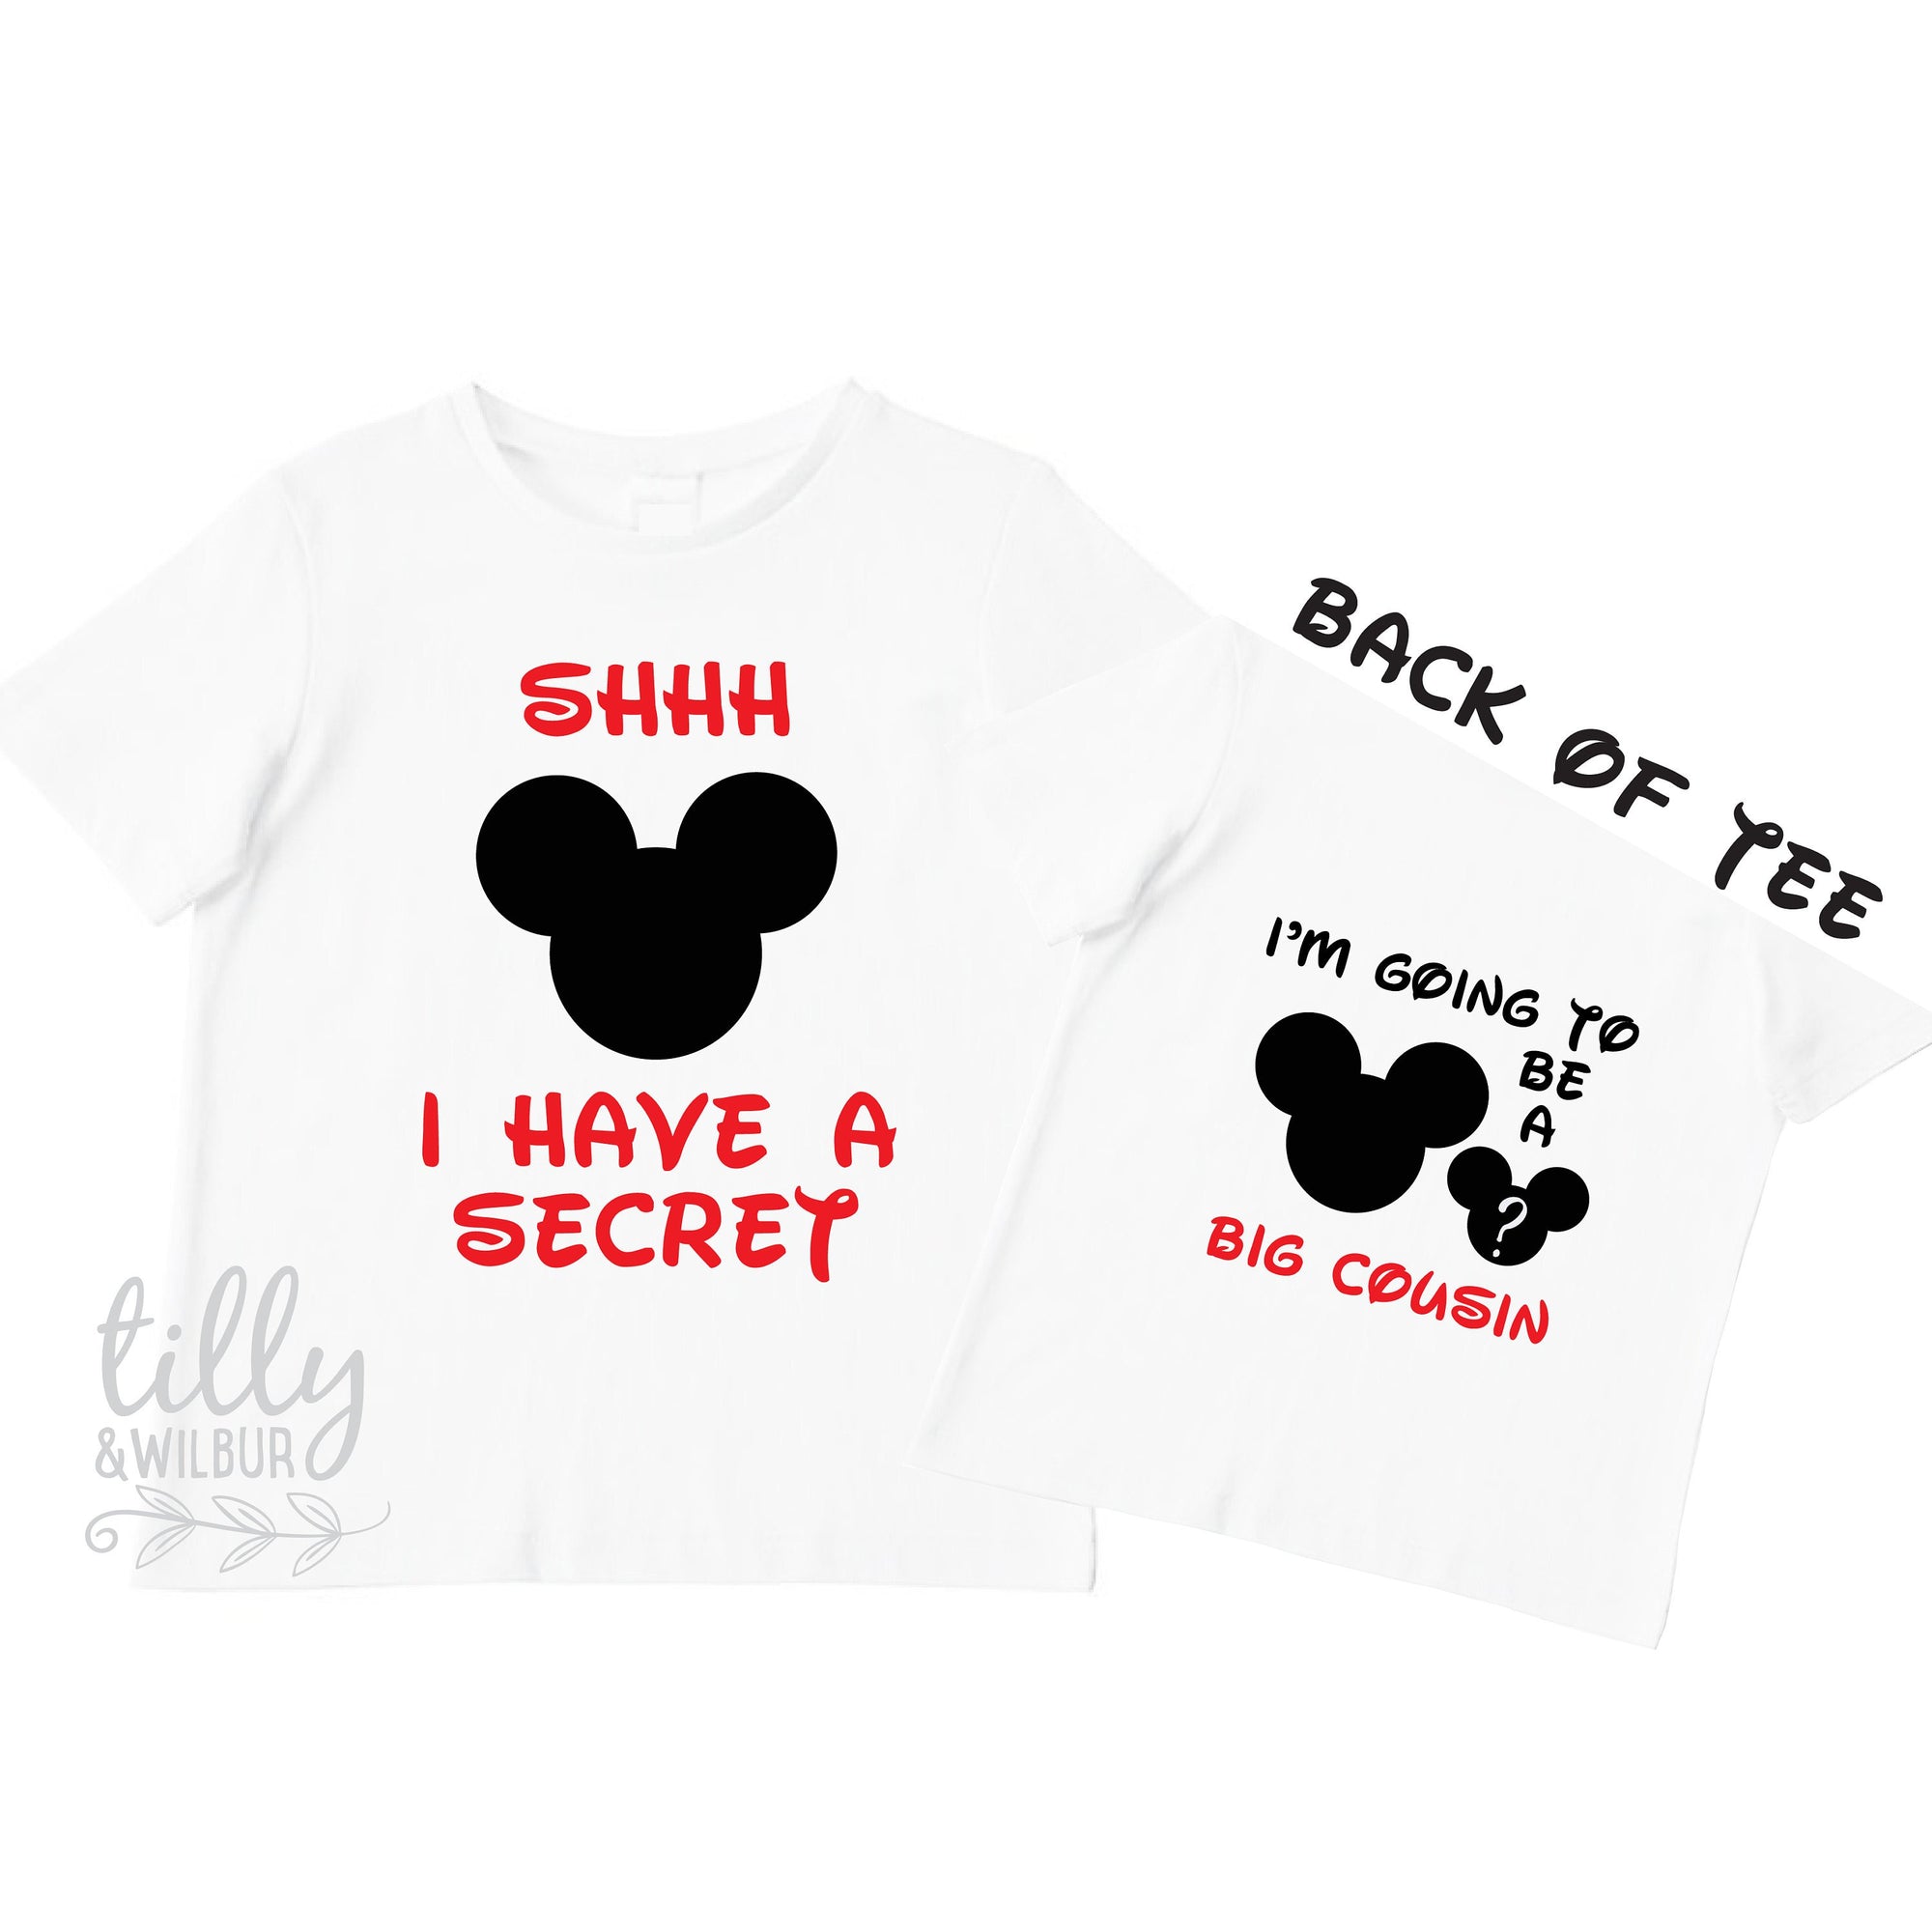 Shhh I Have A Secret I'm Going To Be A Big Cousin TShirt for Boys, Mickey Mouse Design, Big Cousin Shirt, Pregnancy Announcement, Boys Tee